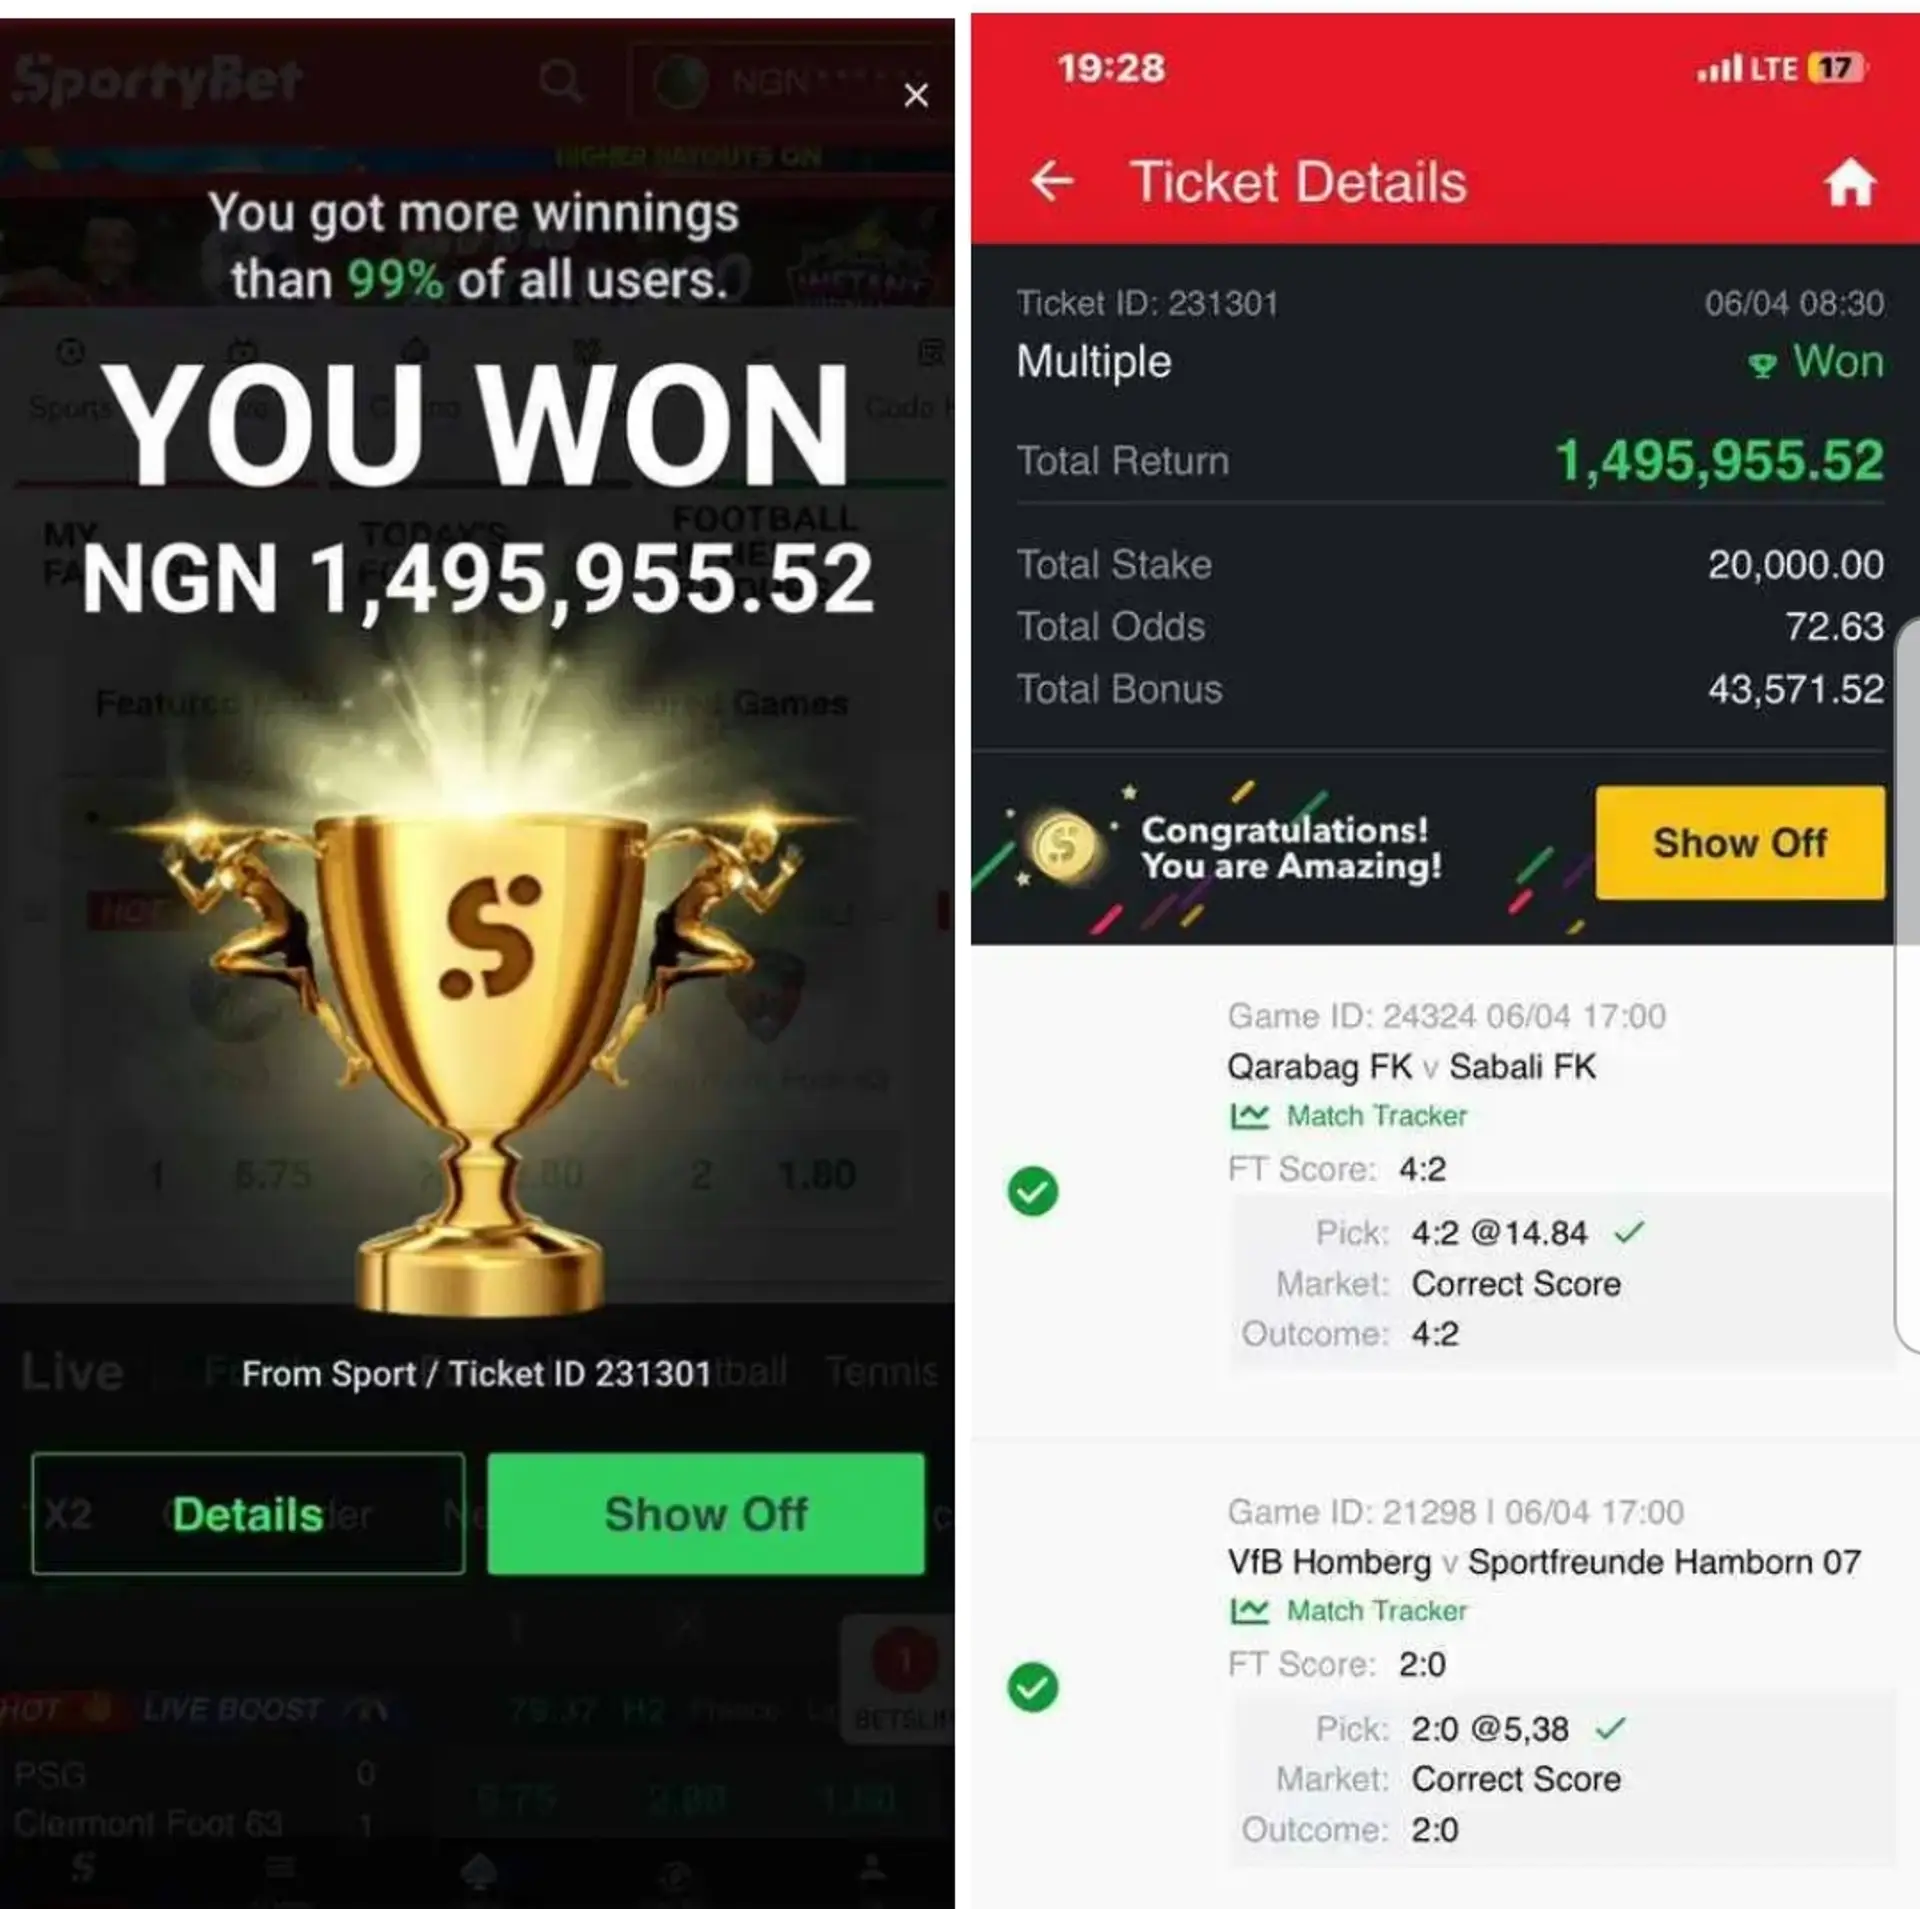 WhatsApp+2348133676846. Here is another chance for you to cash out big subscribe to mr Charles odd a